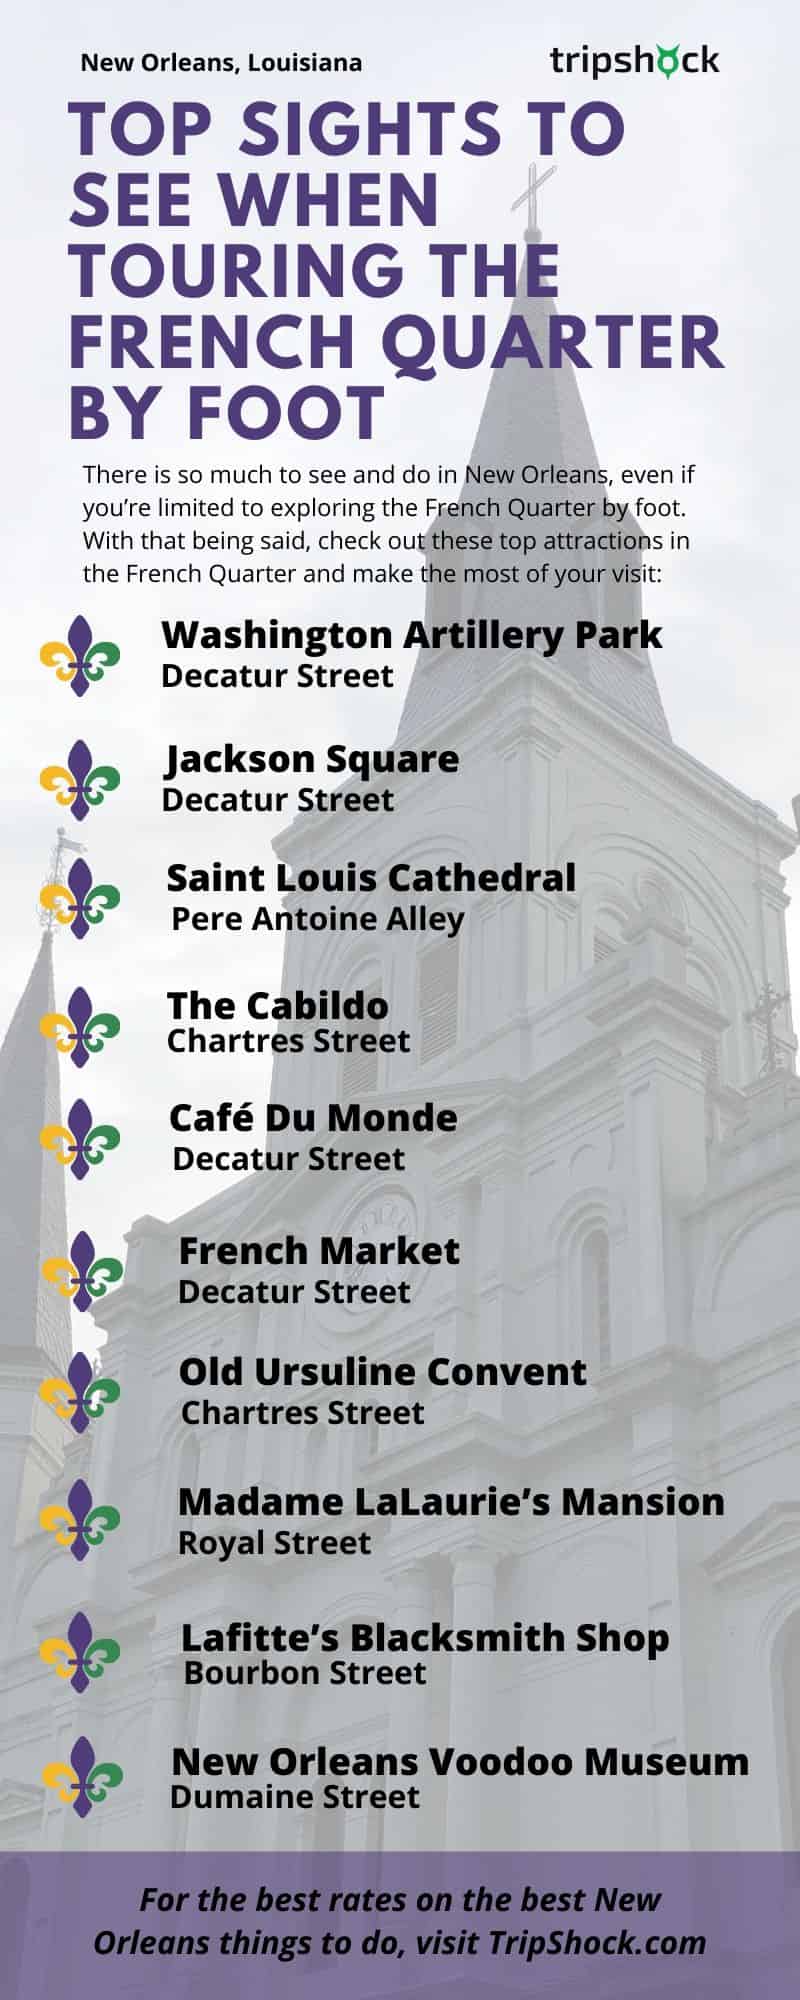 Top Sights to See When Touring the French Quarter by Foot